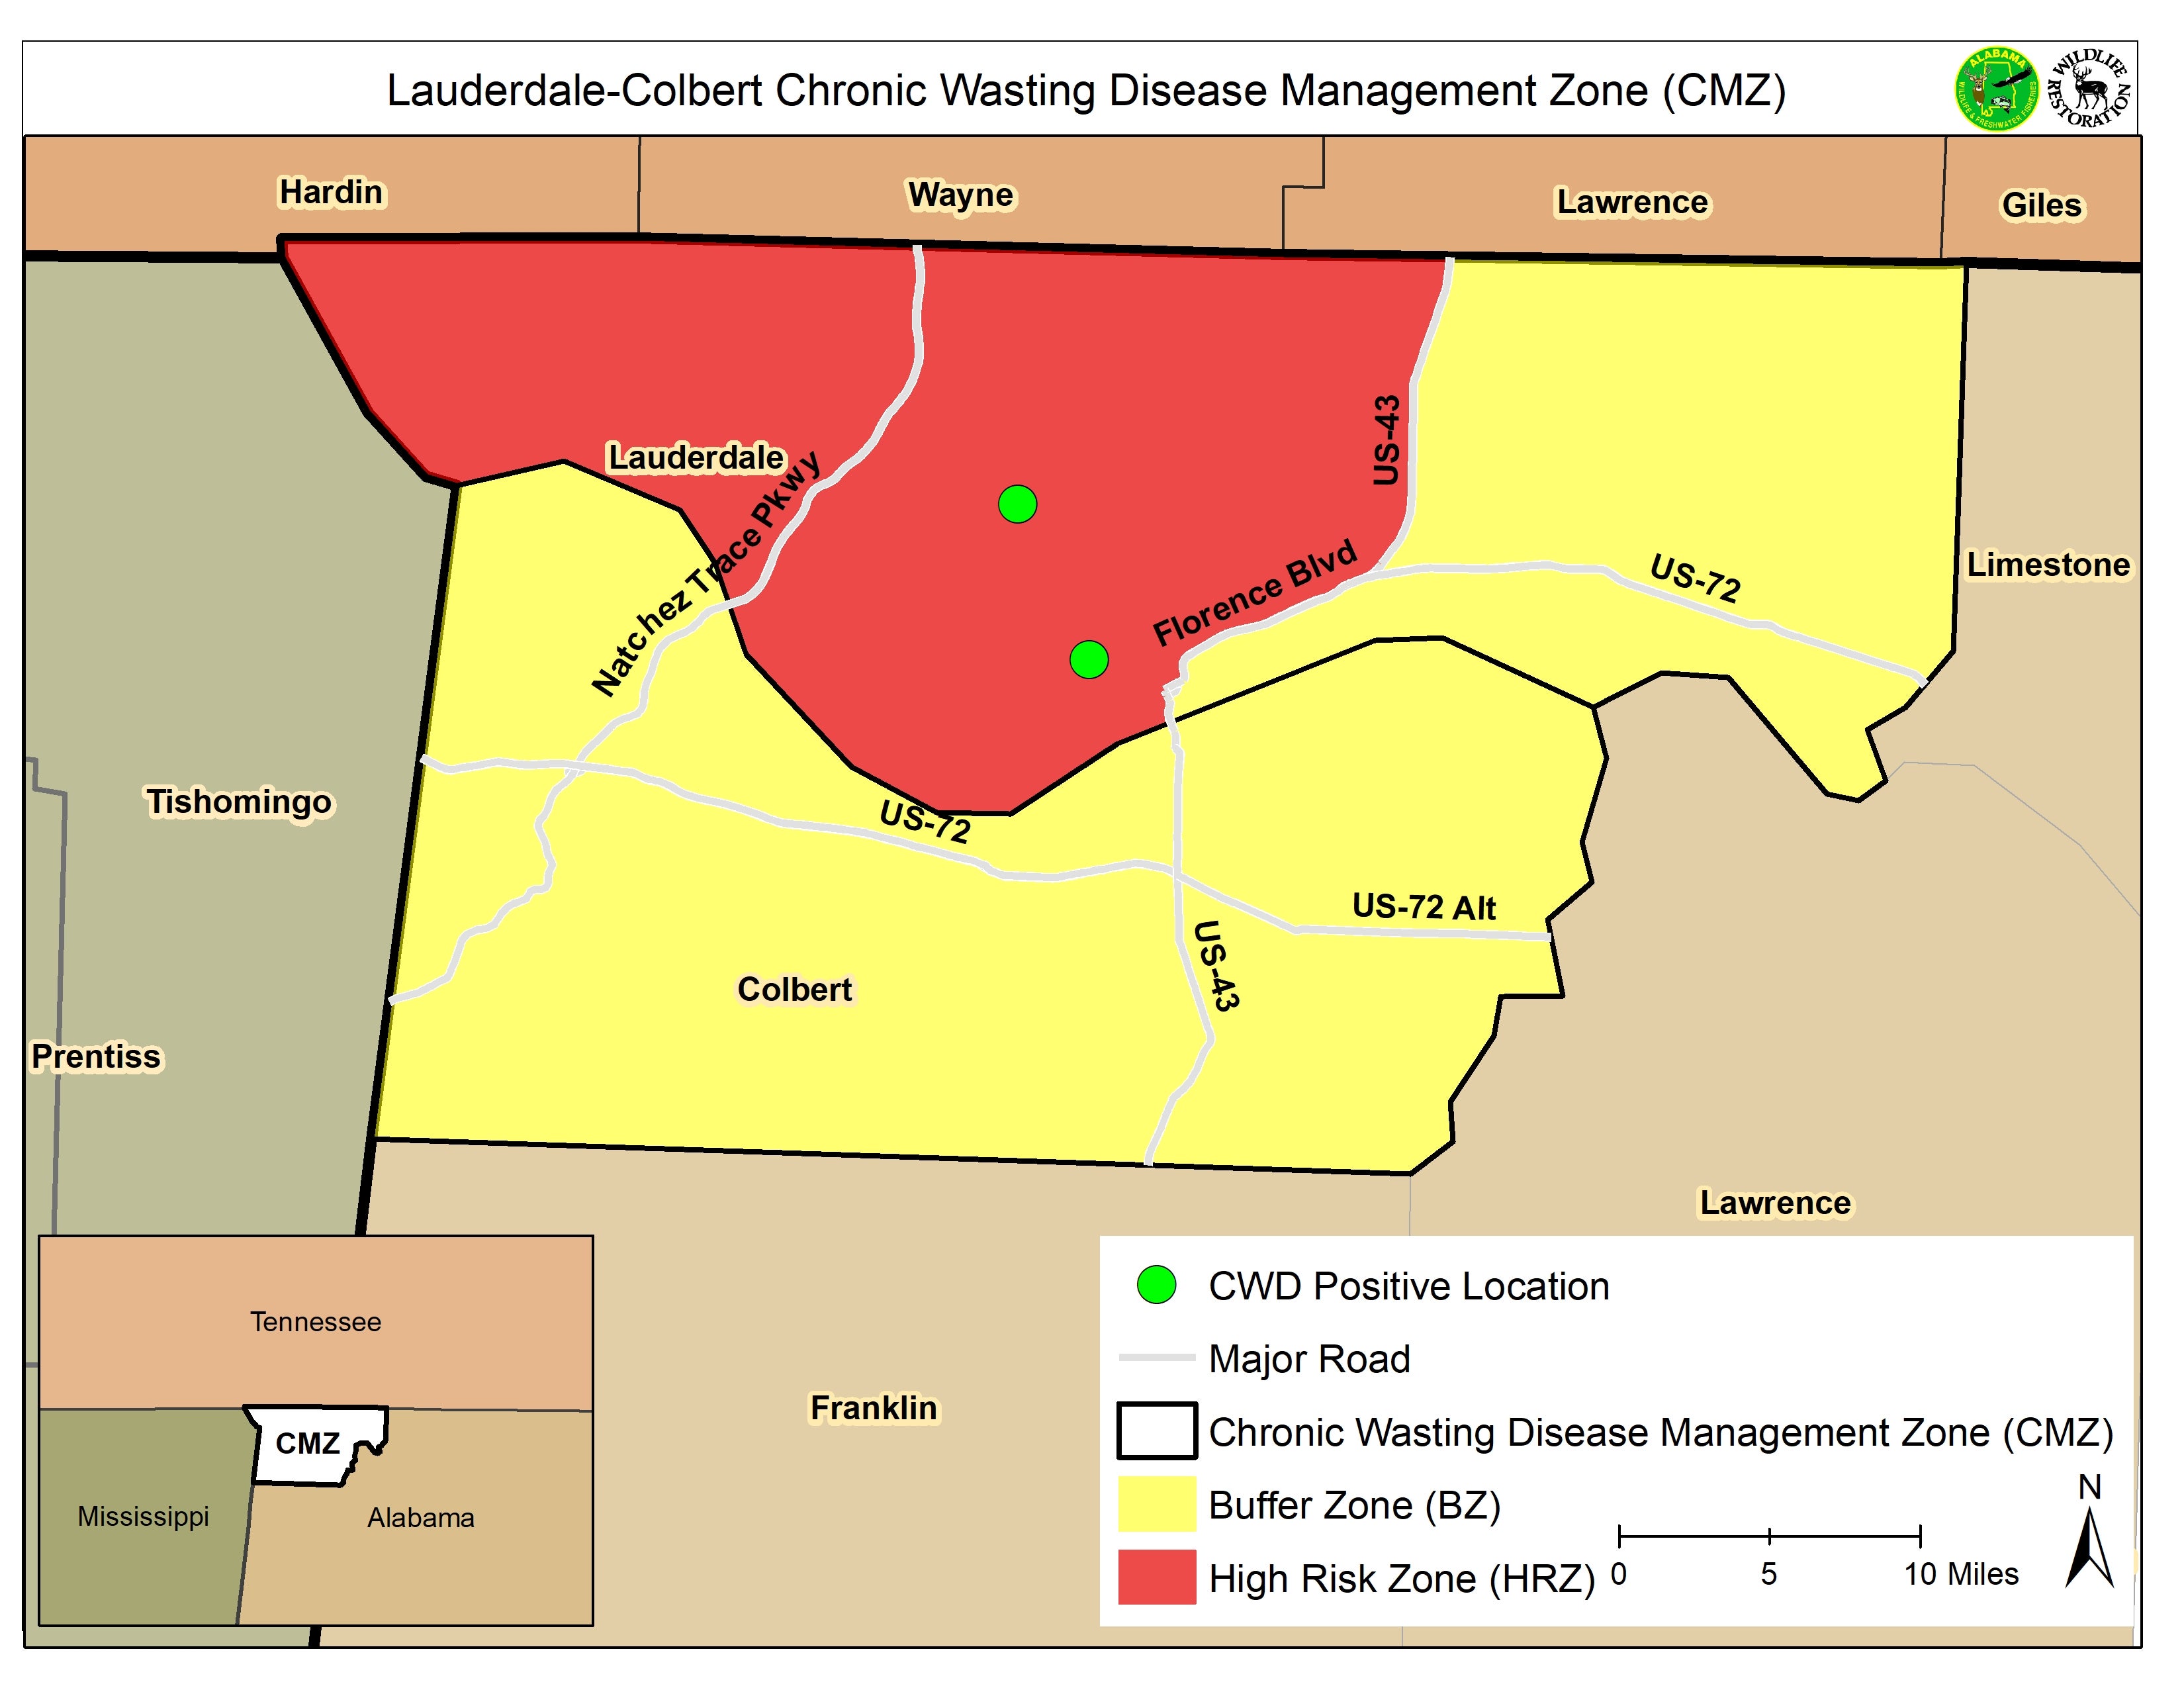 Mandatory CWD Testing This Weekend for Lauderdale and Colbert Counties